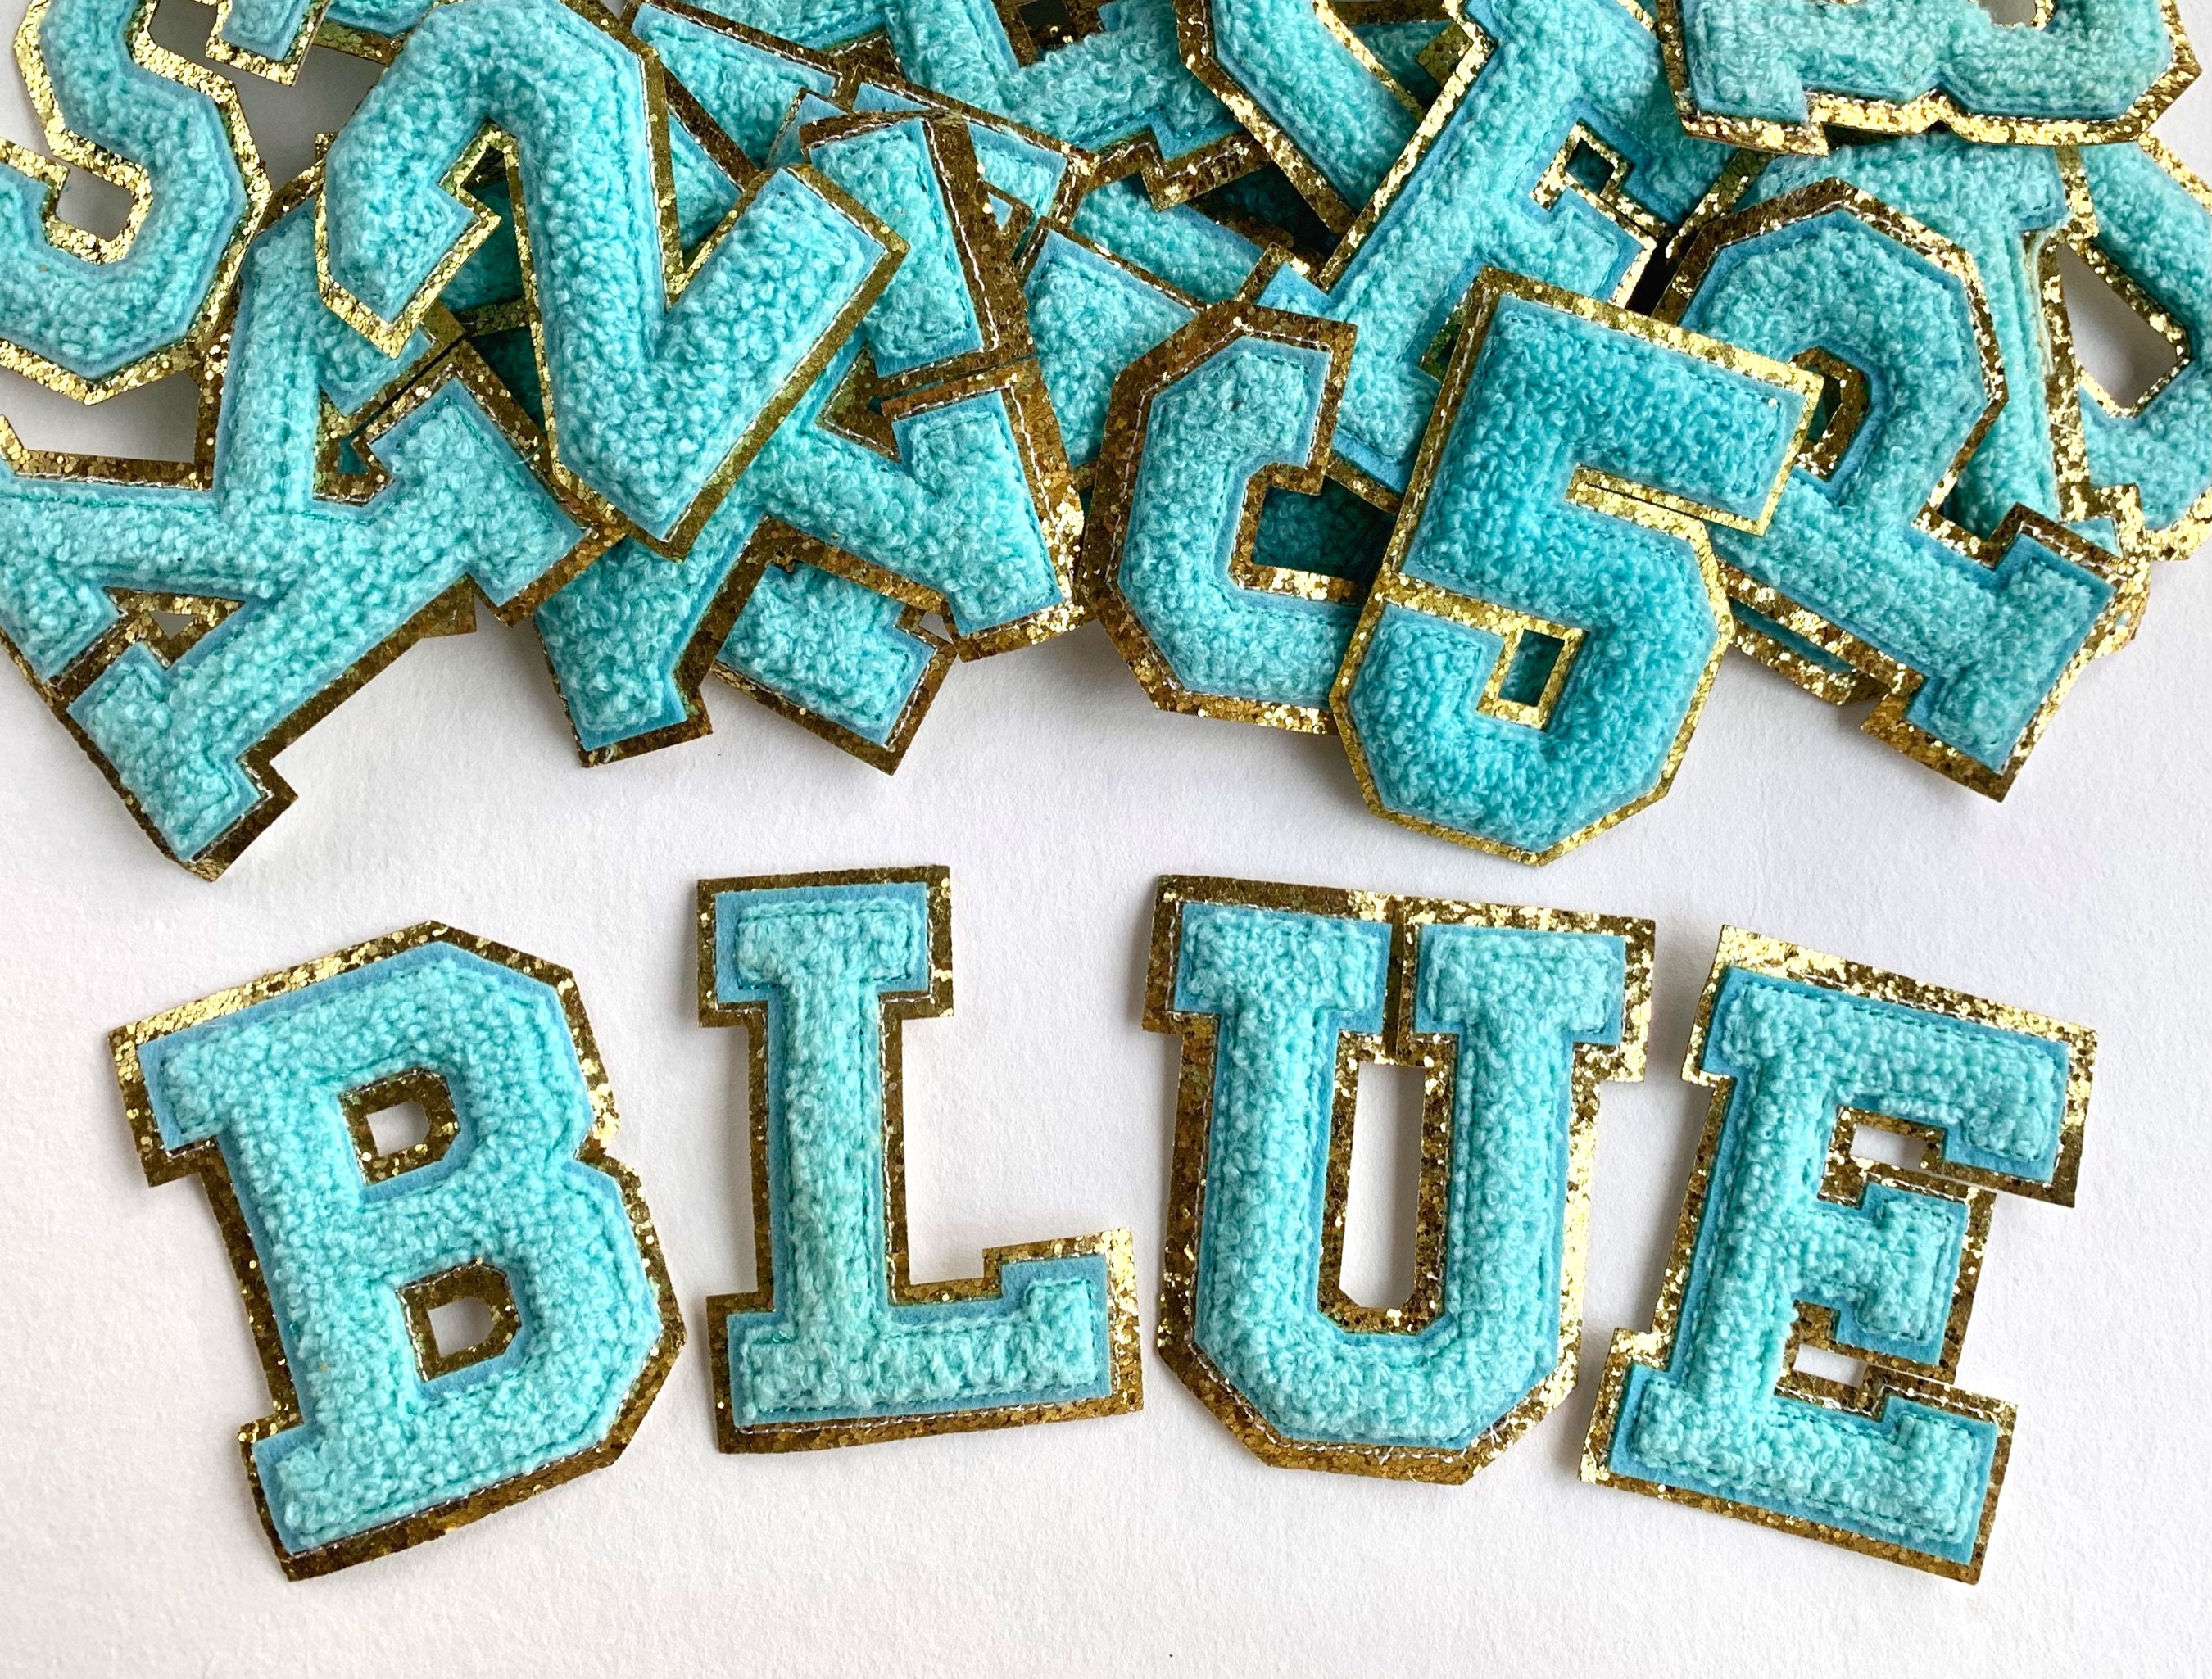 12 Packs: 42 ct. (504 total) 1.5 Iron-On Glitter Cooper Letters by  Imagin8™